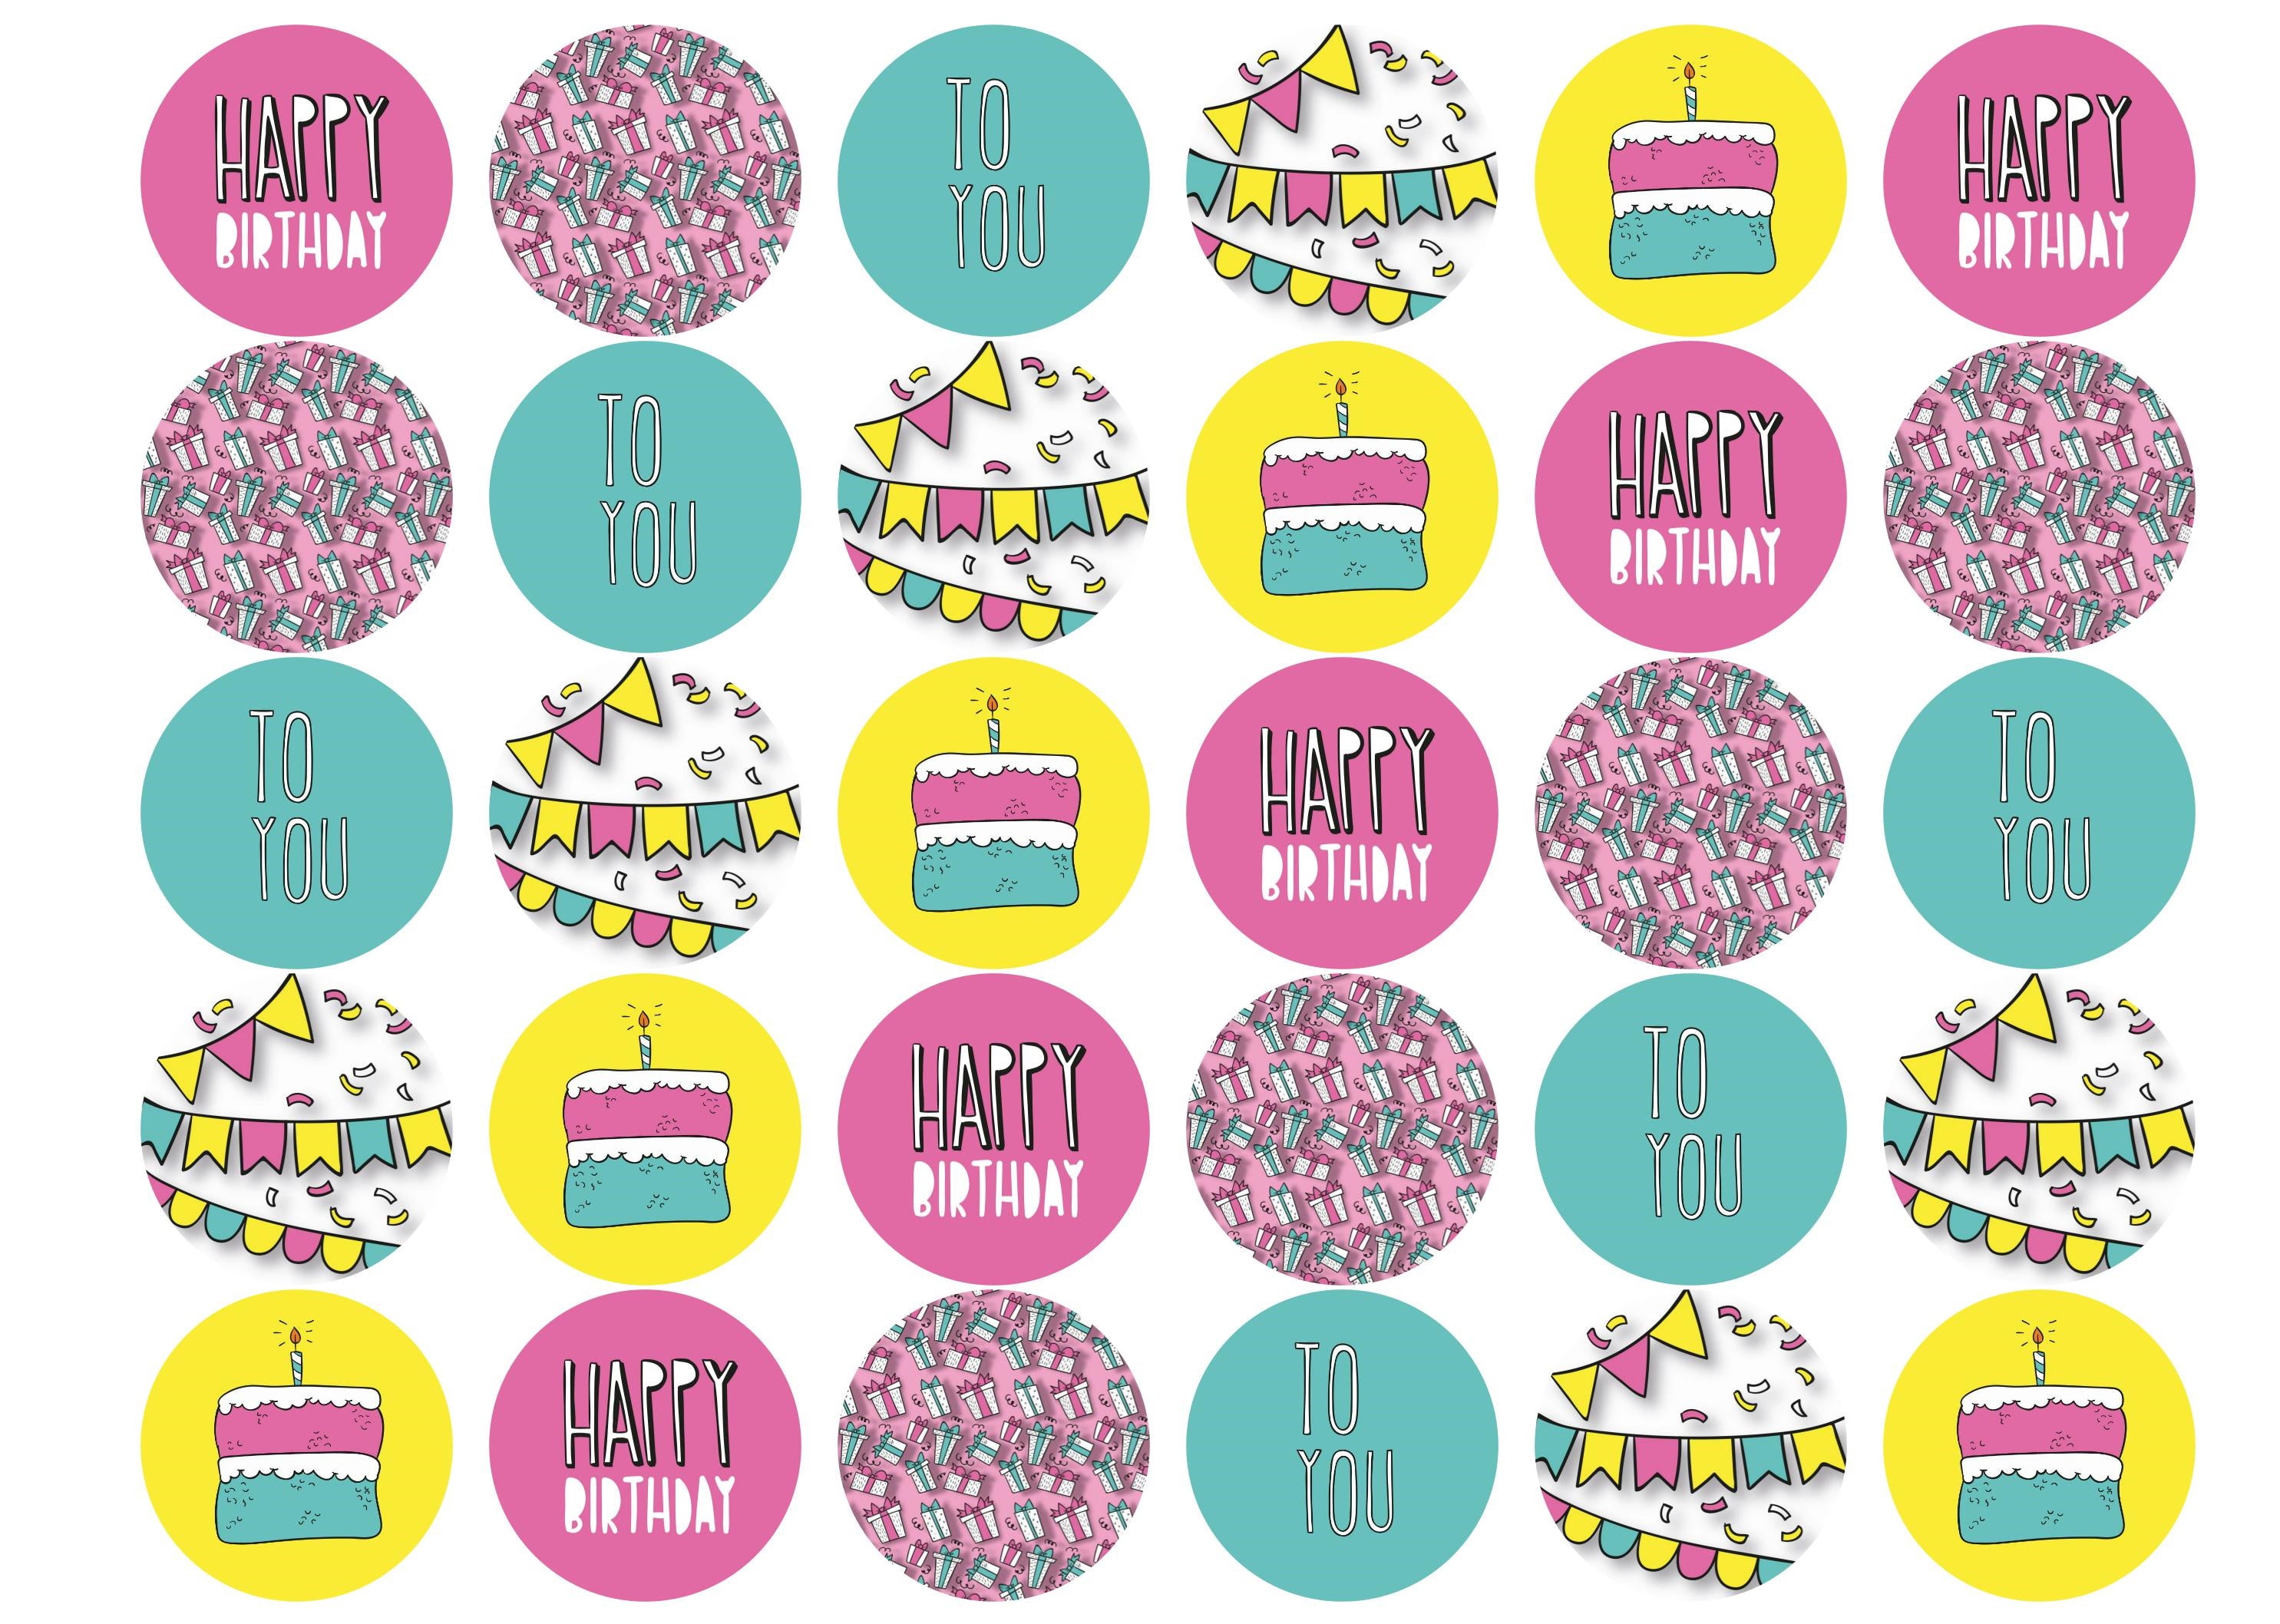 Edible cupcake toppers with mixed birthday designs in pink blue and yellow